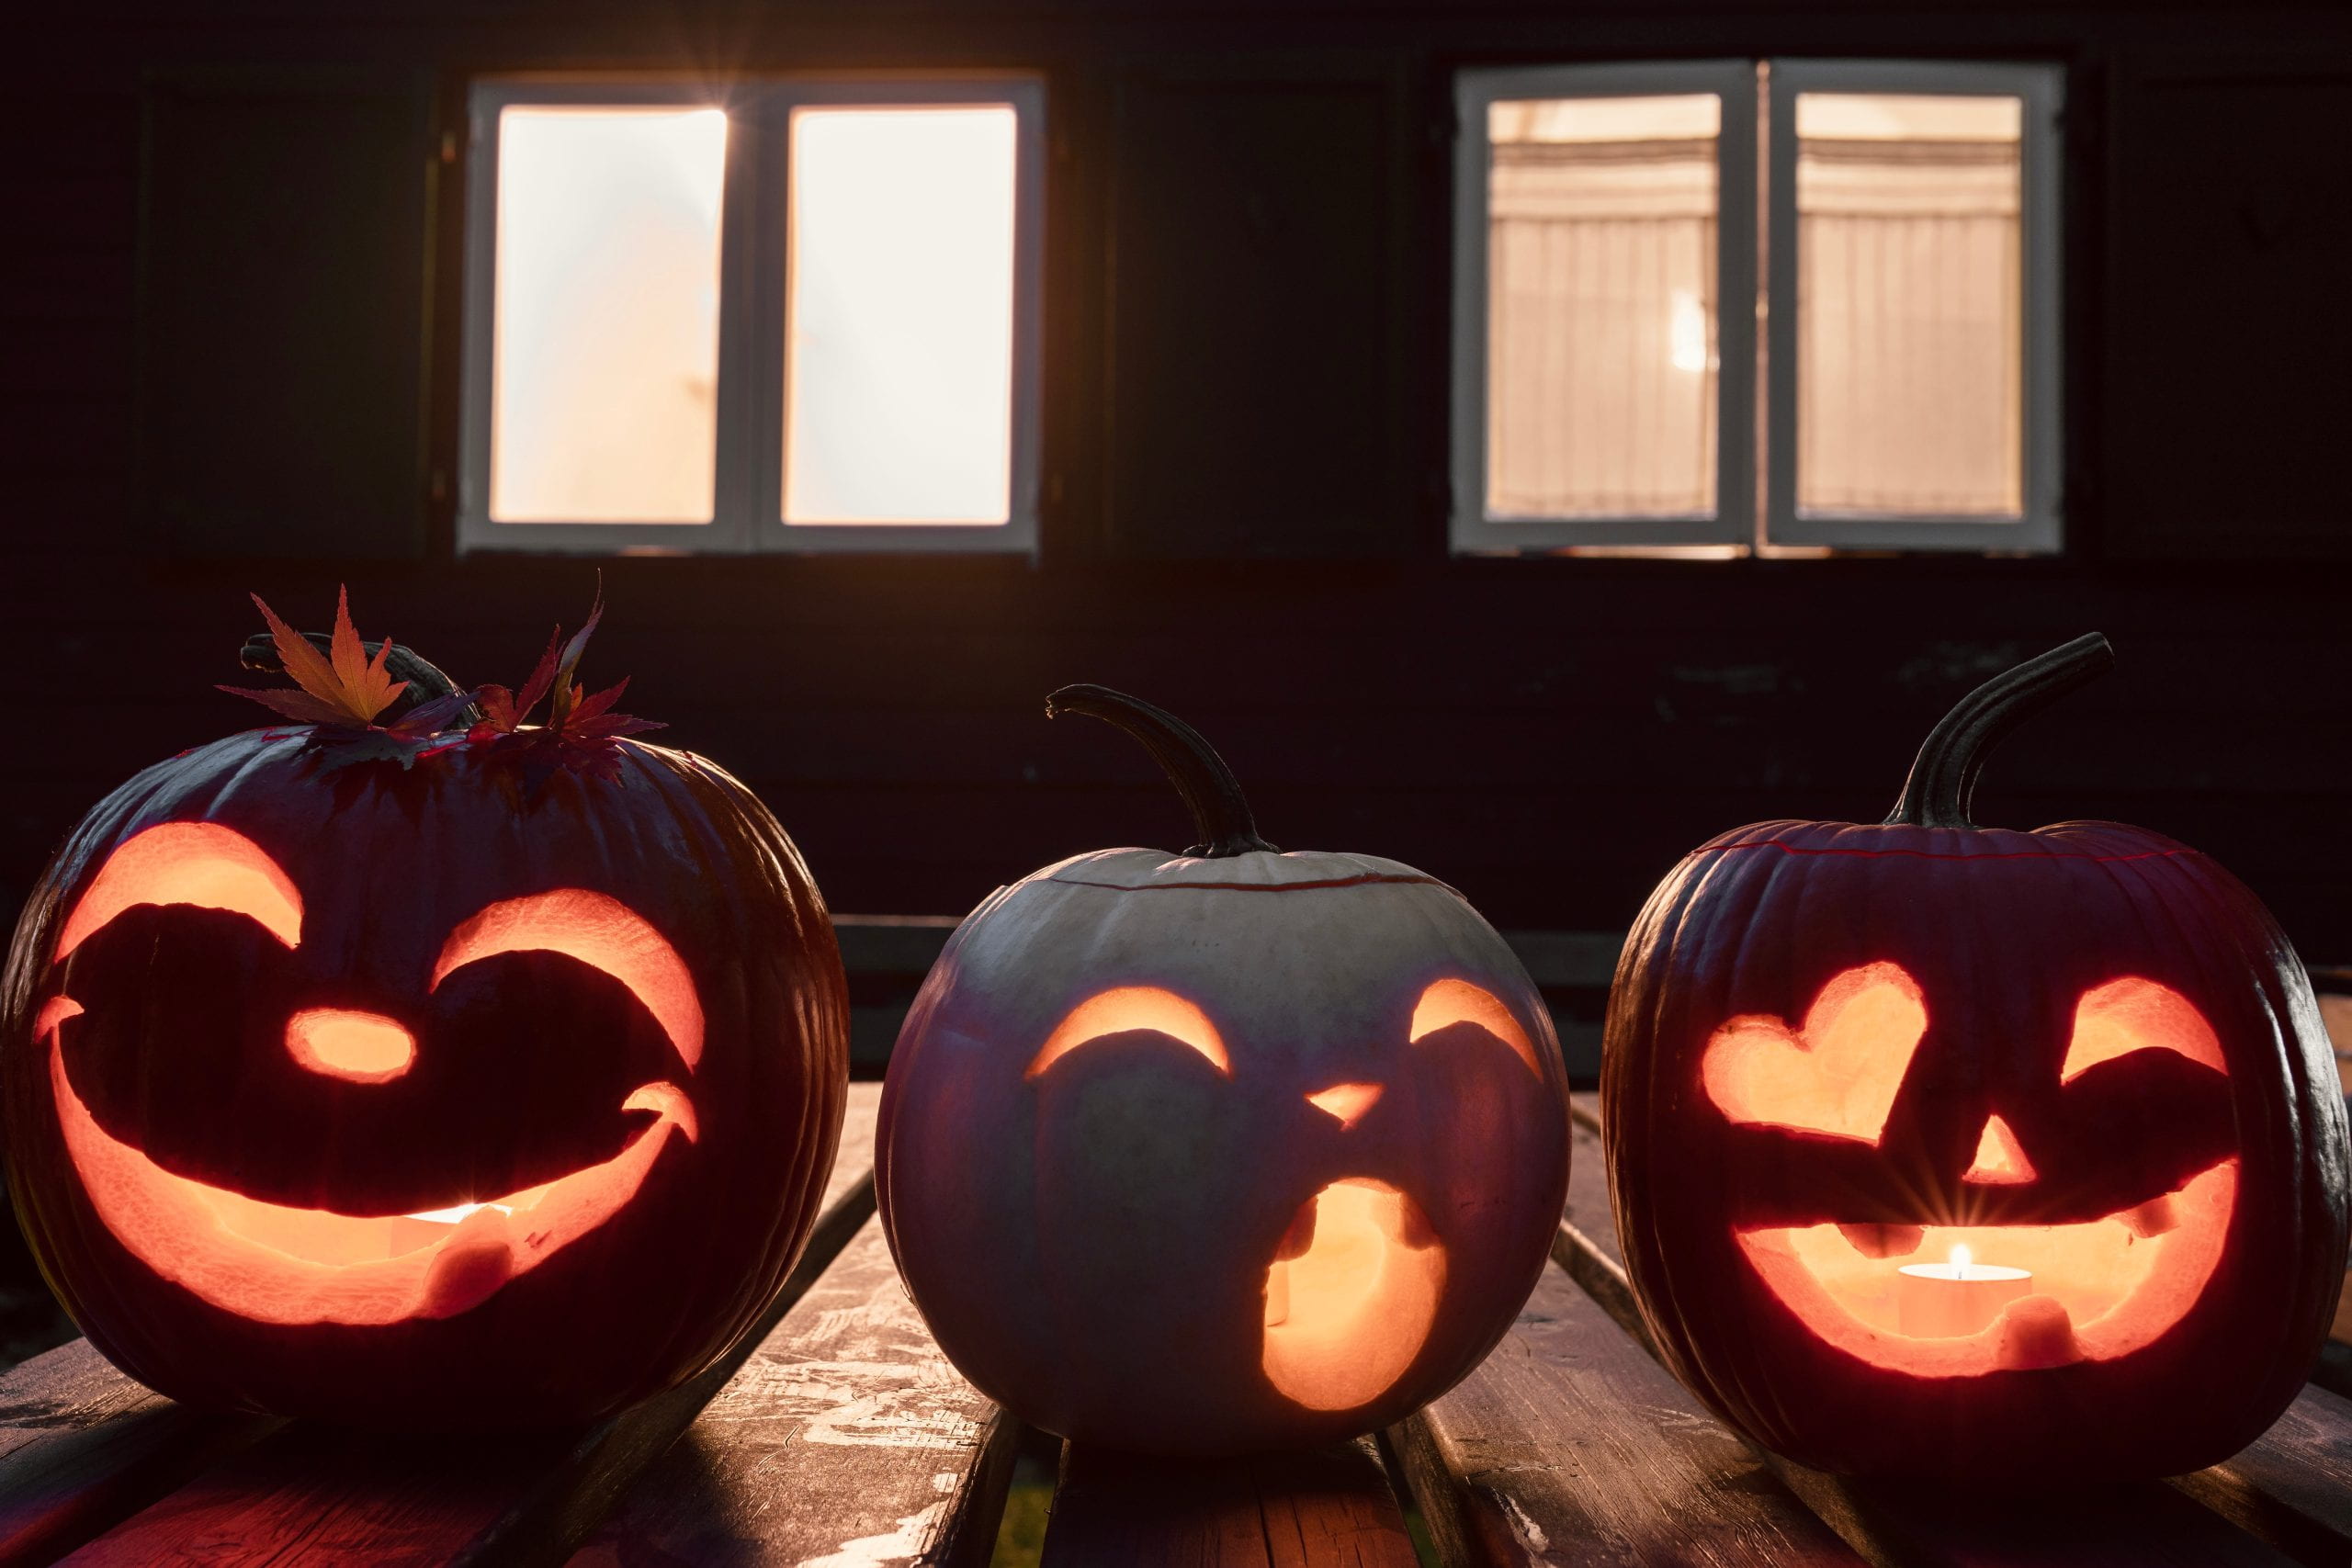 Three pumpkins in front of a window